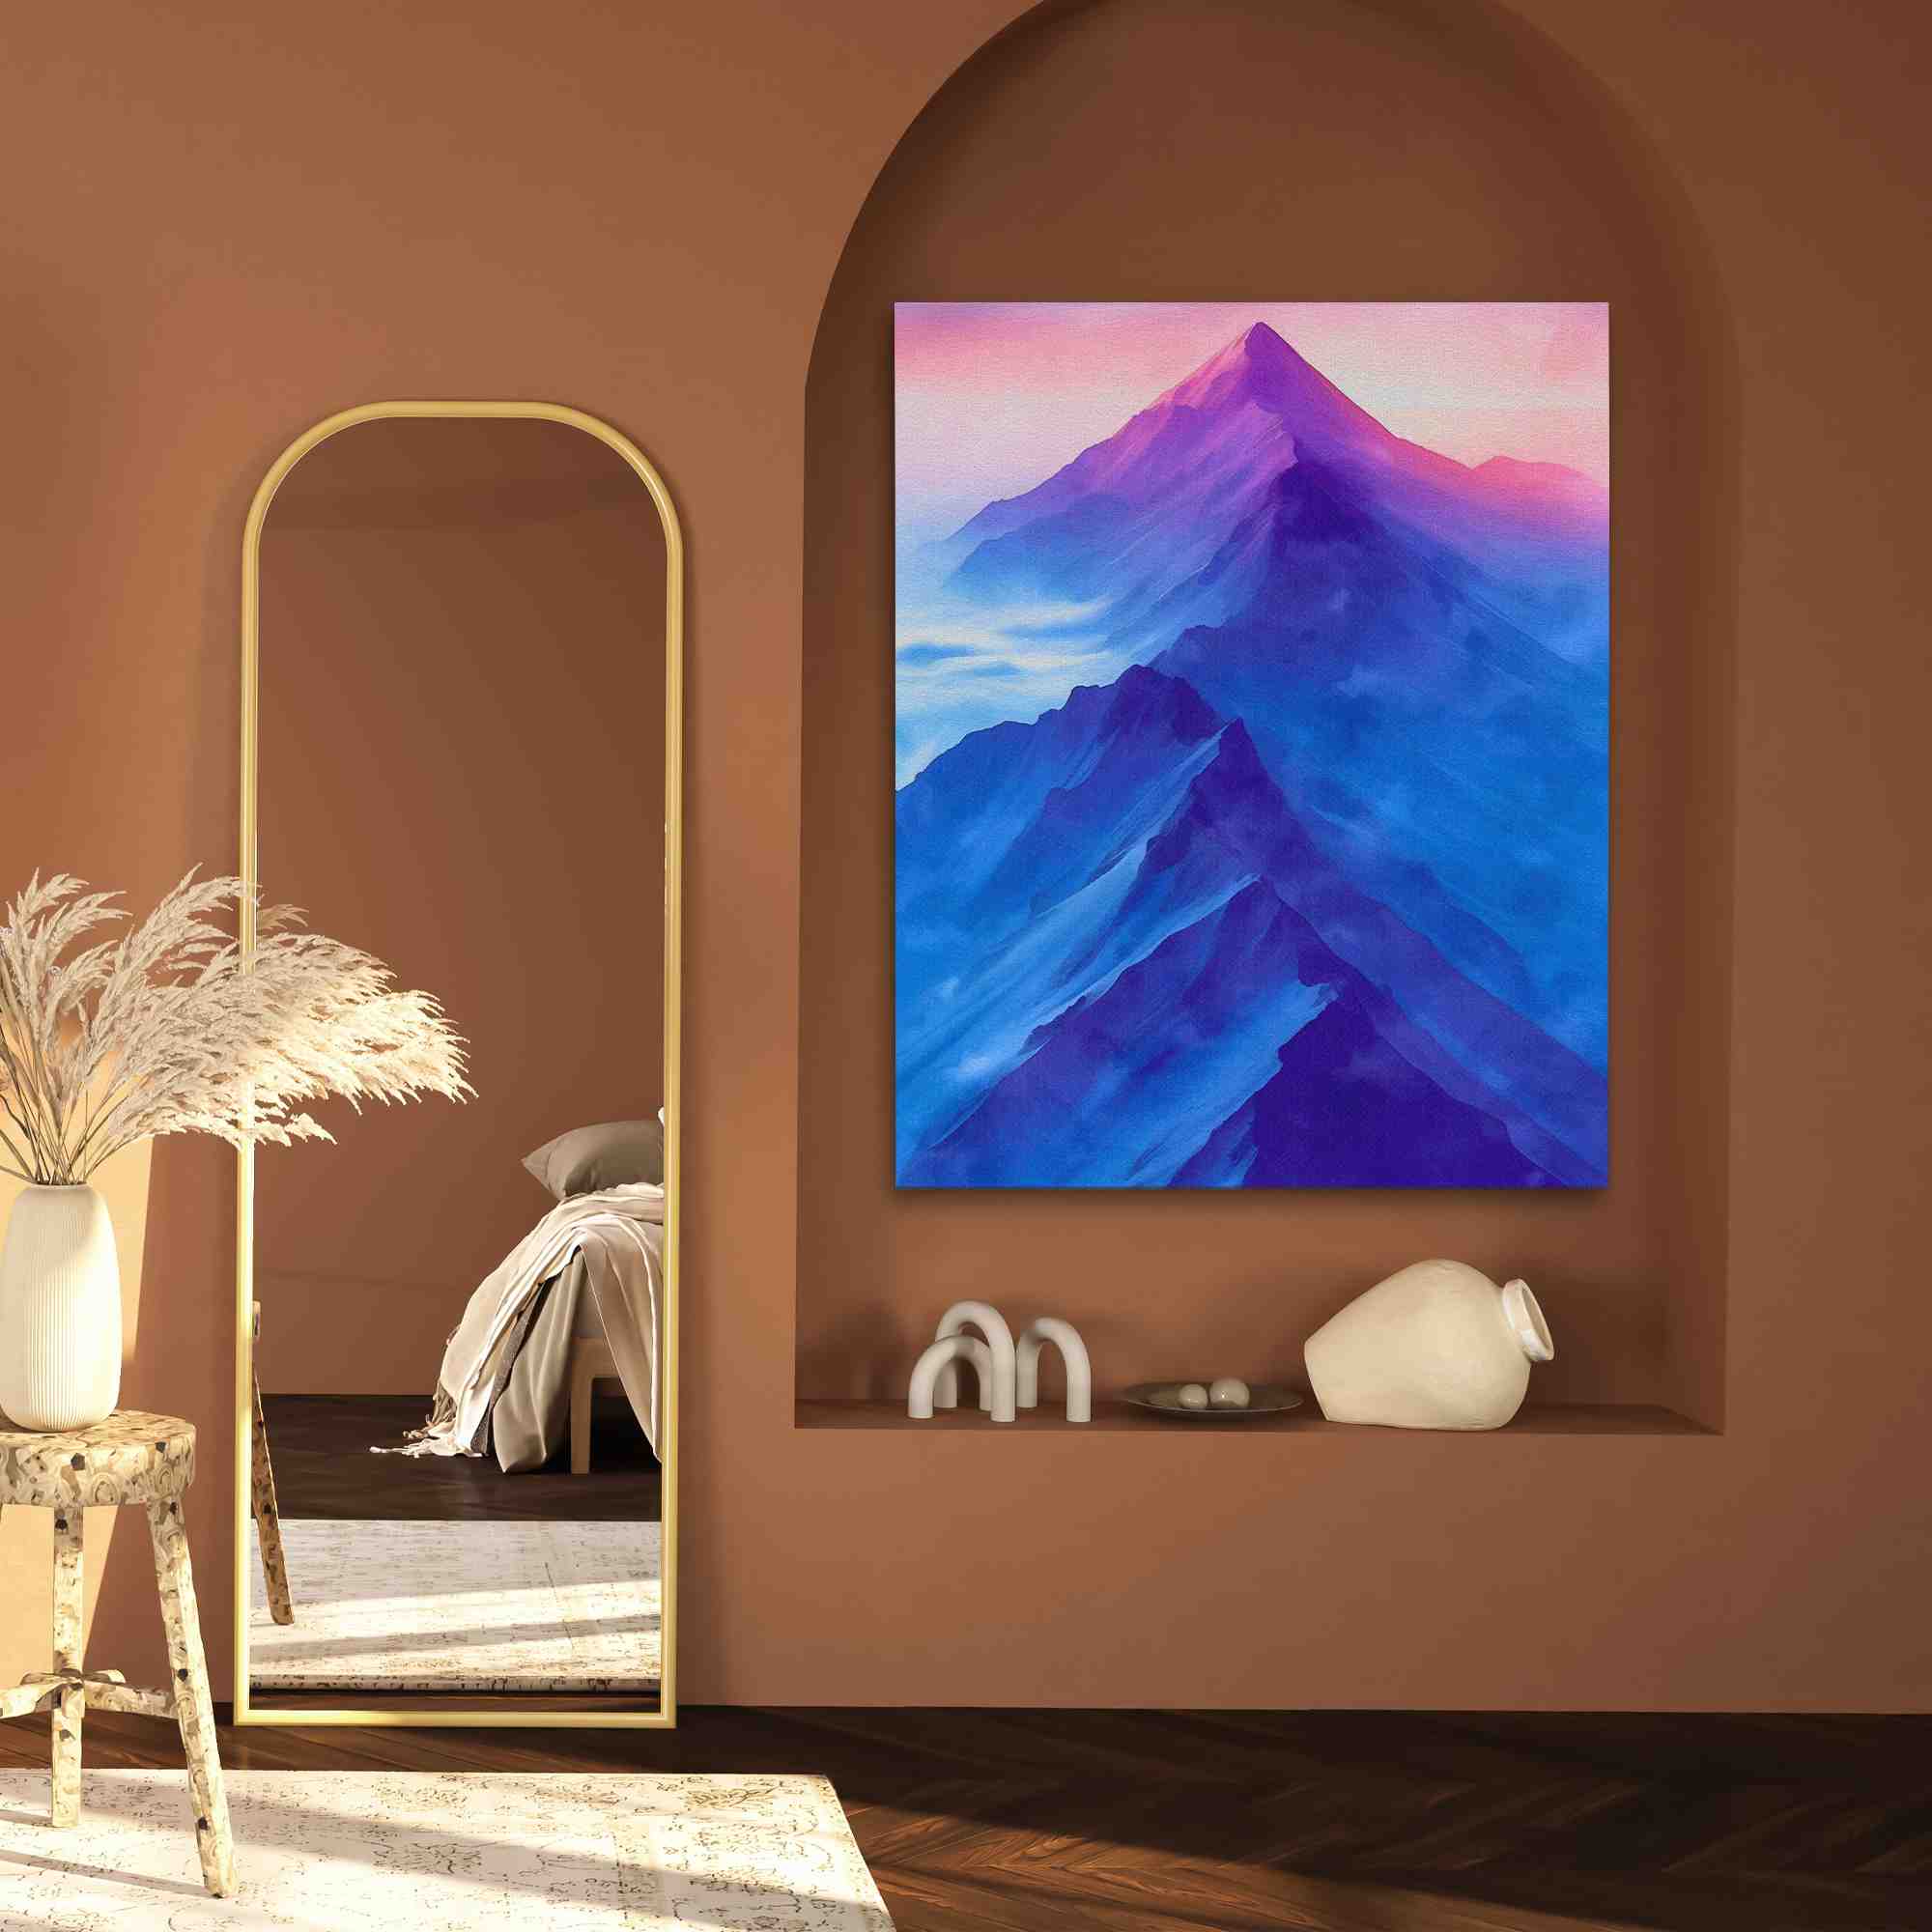 a painting of a mountain range in blue and pink